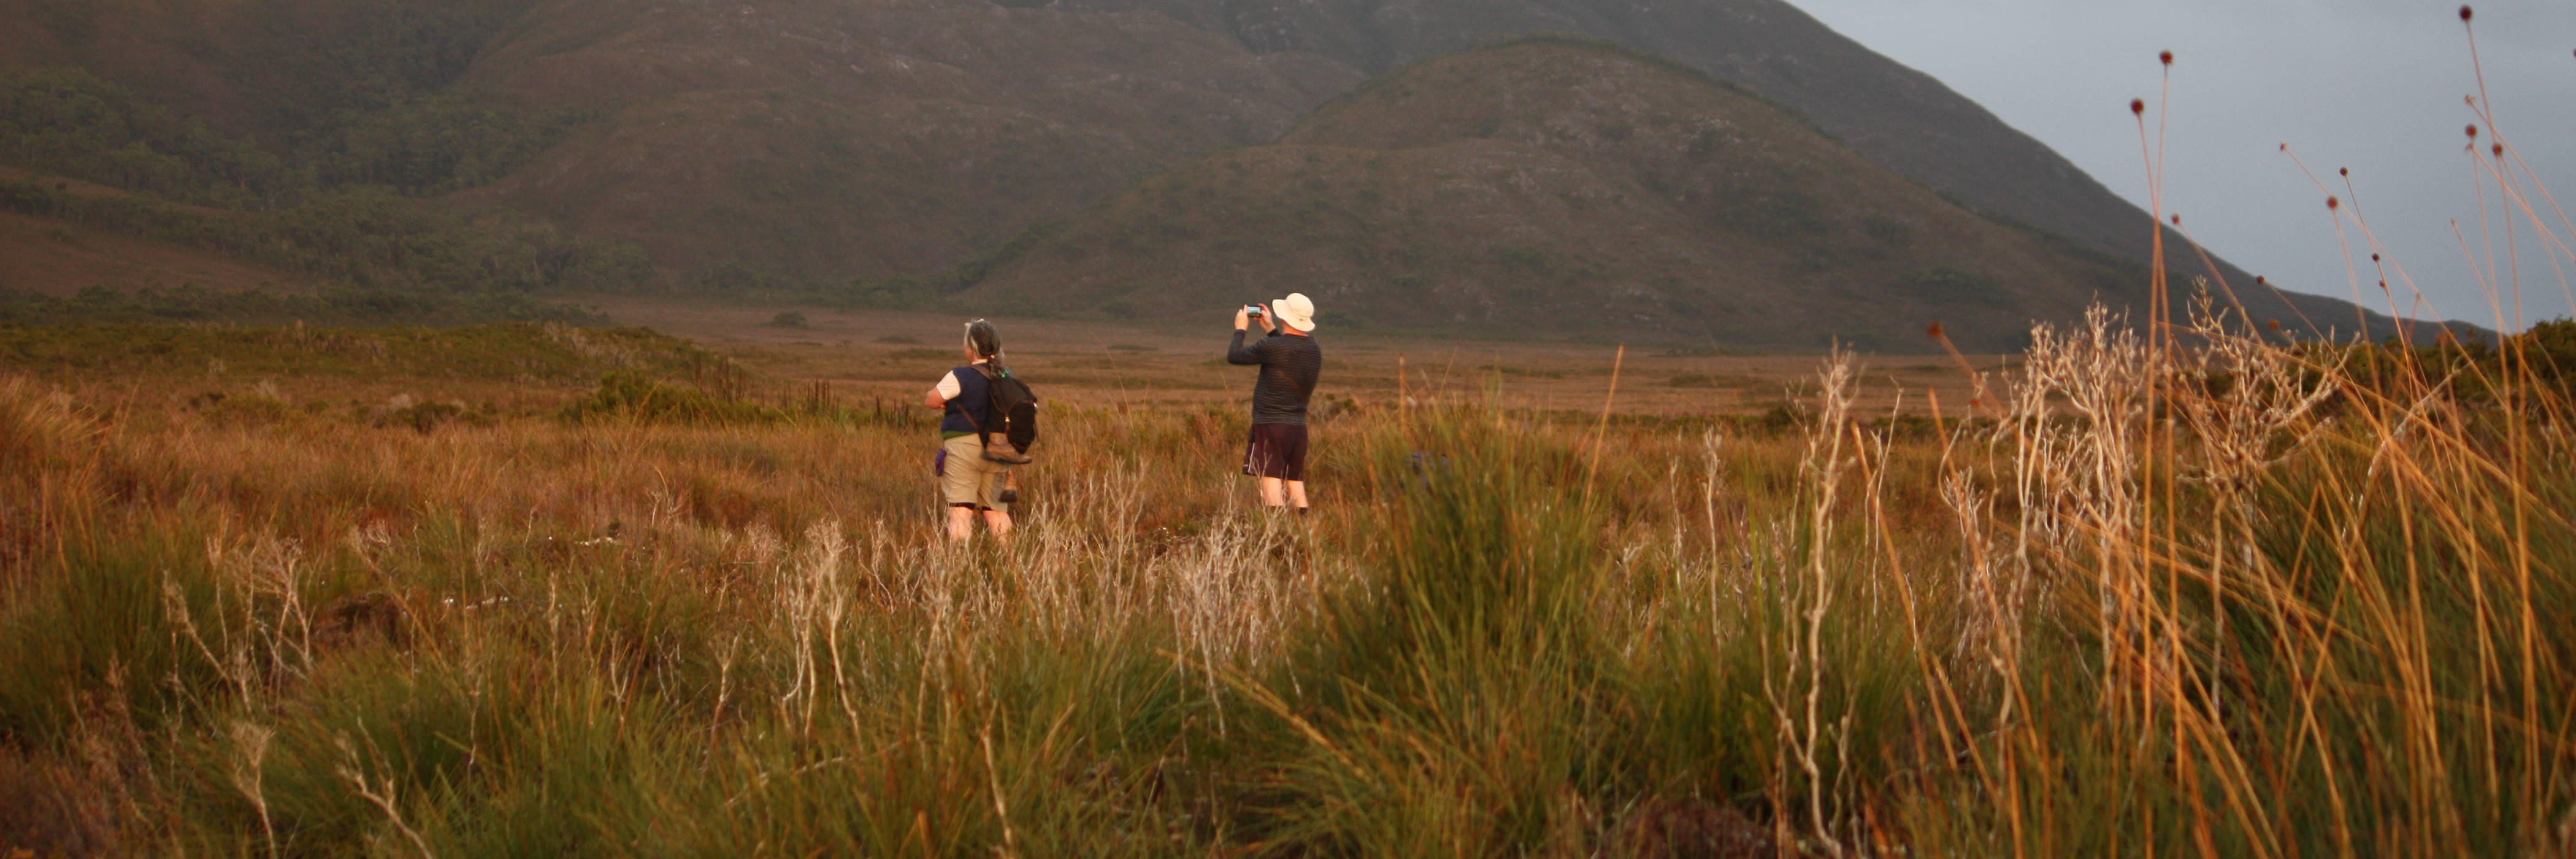 ‘Team Melaleuca’ carry out Where? Where? Wedgie! in the World Heritage Area, southern Tasmania. Standing in buttongrass with a mountain in the distance, they survey the area with binoculars. Photo: Persia Brooks.